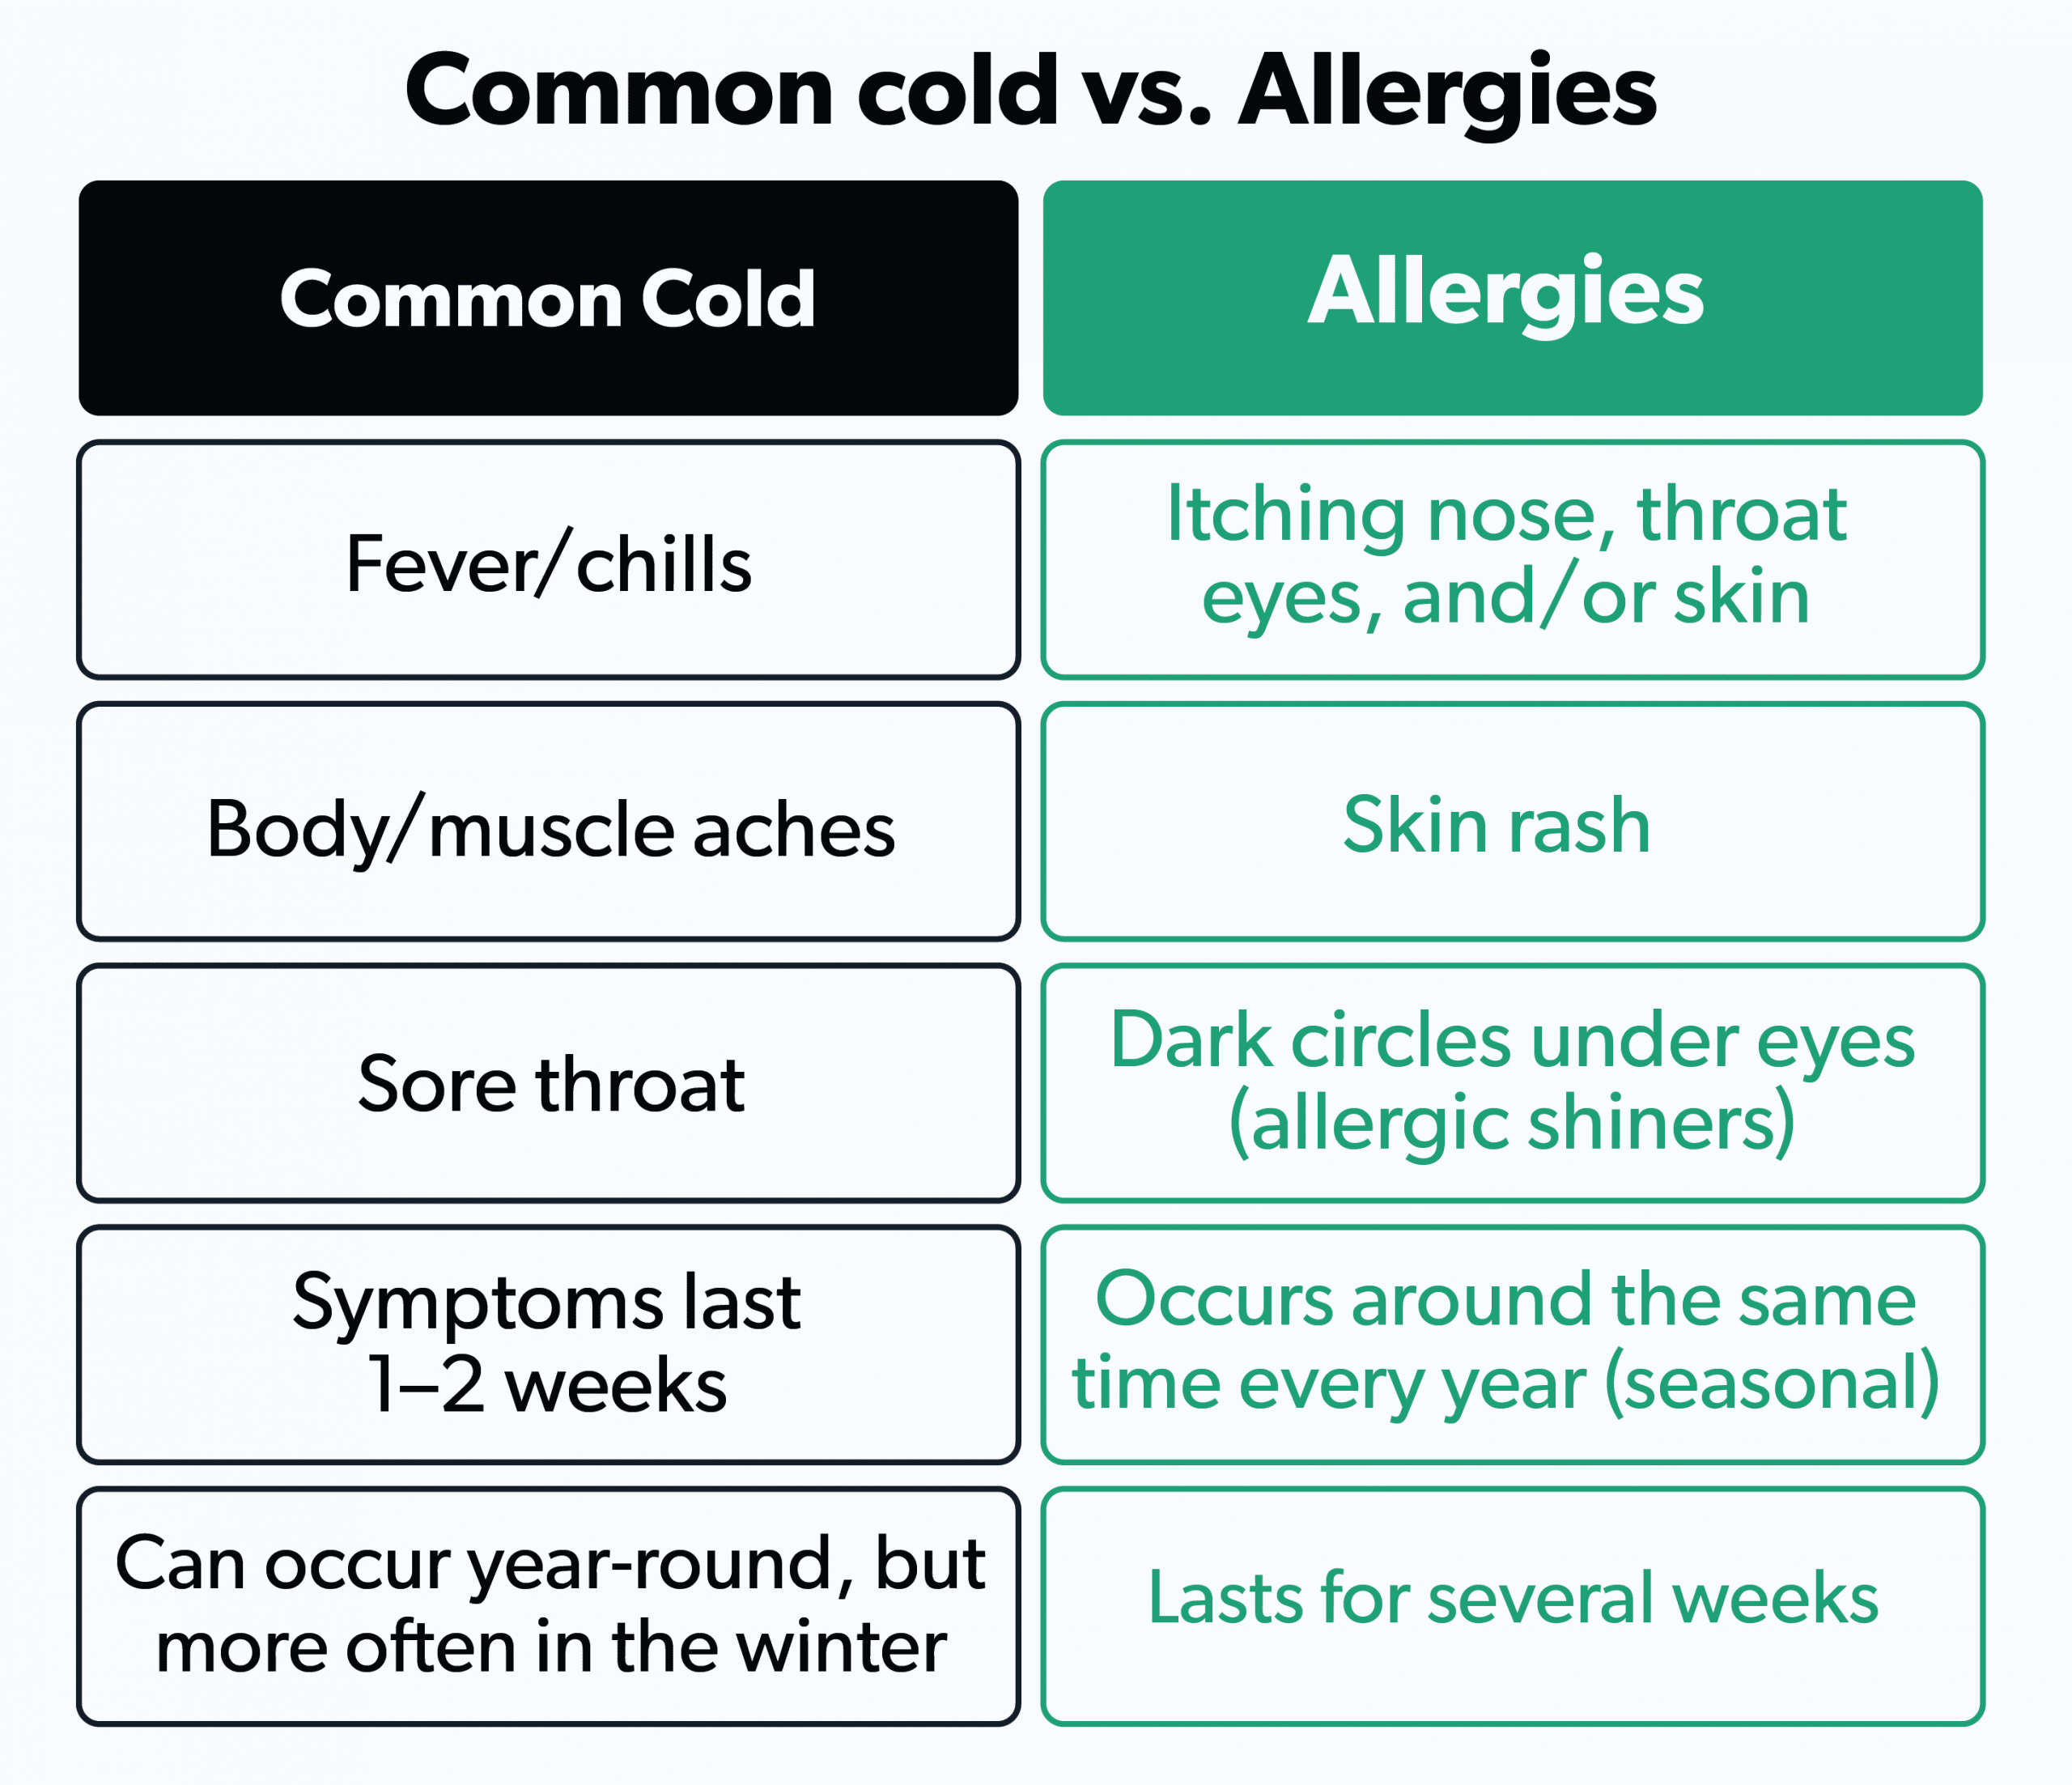 Allergy vs. Cold: How Can You Tell The Difference?